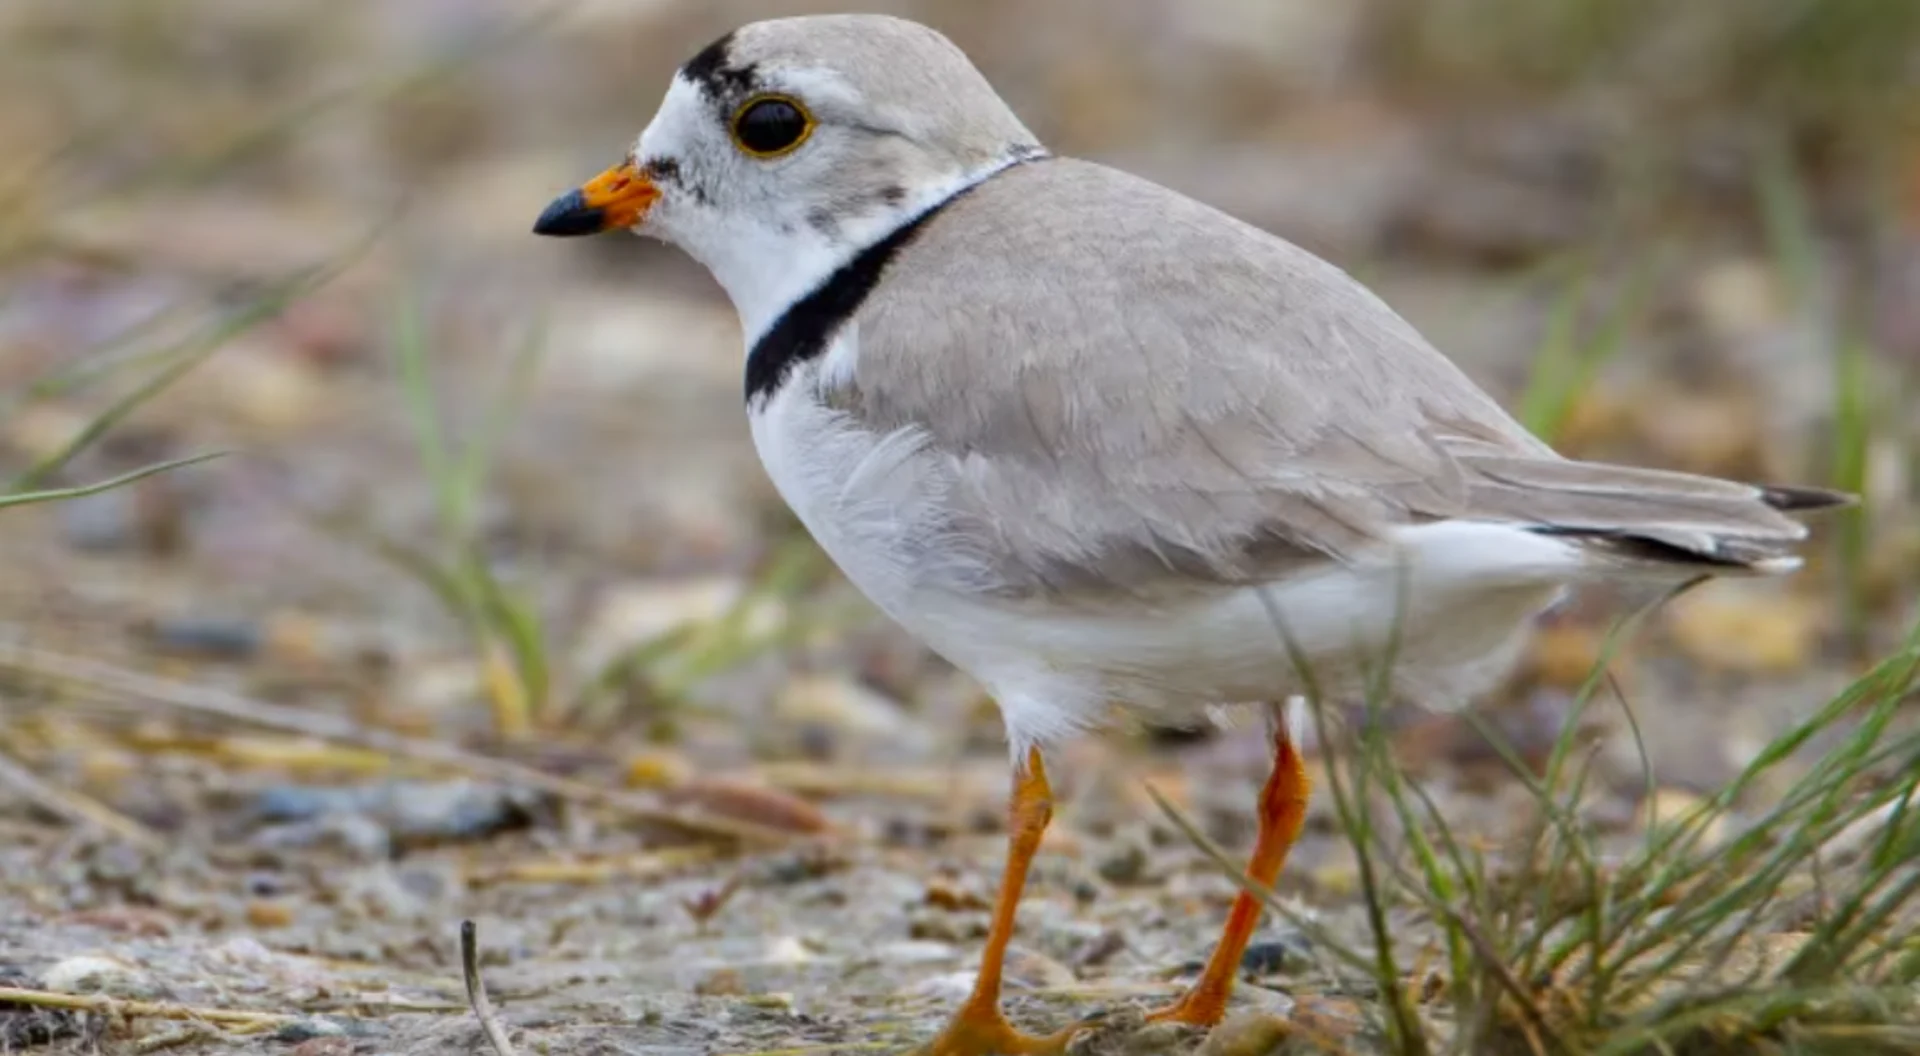 Piping plover population persists despite extreme flood-drought cycles